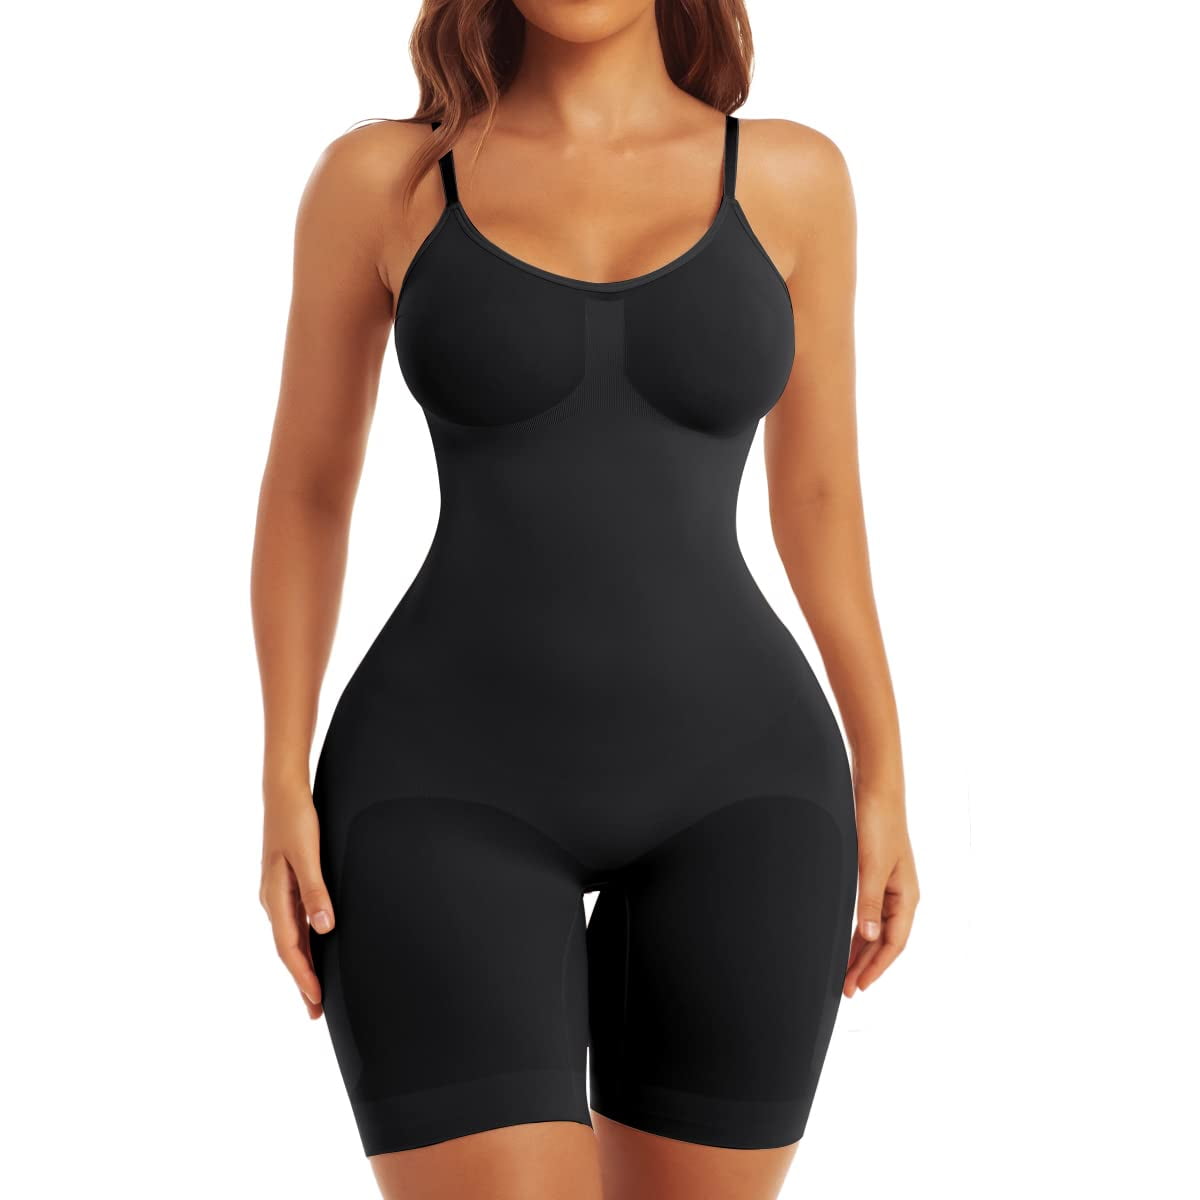 Your Contour Mid-Thigh Arm Slimmer Body Shapewear - All in One